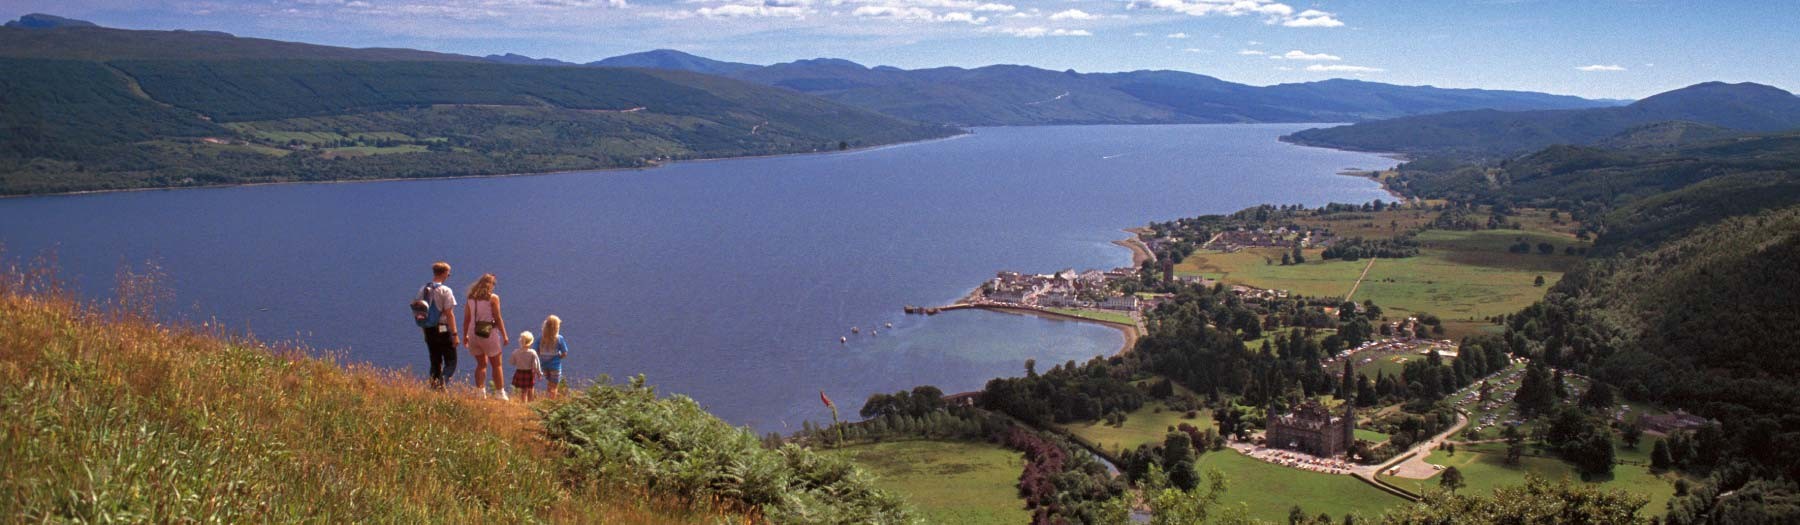 Image: Inveraray and Loch Fyne. Credit: Image used with permission from VisitScotland and Scottish Viewpoint.